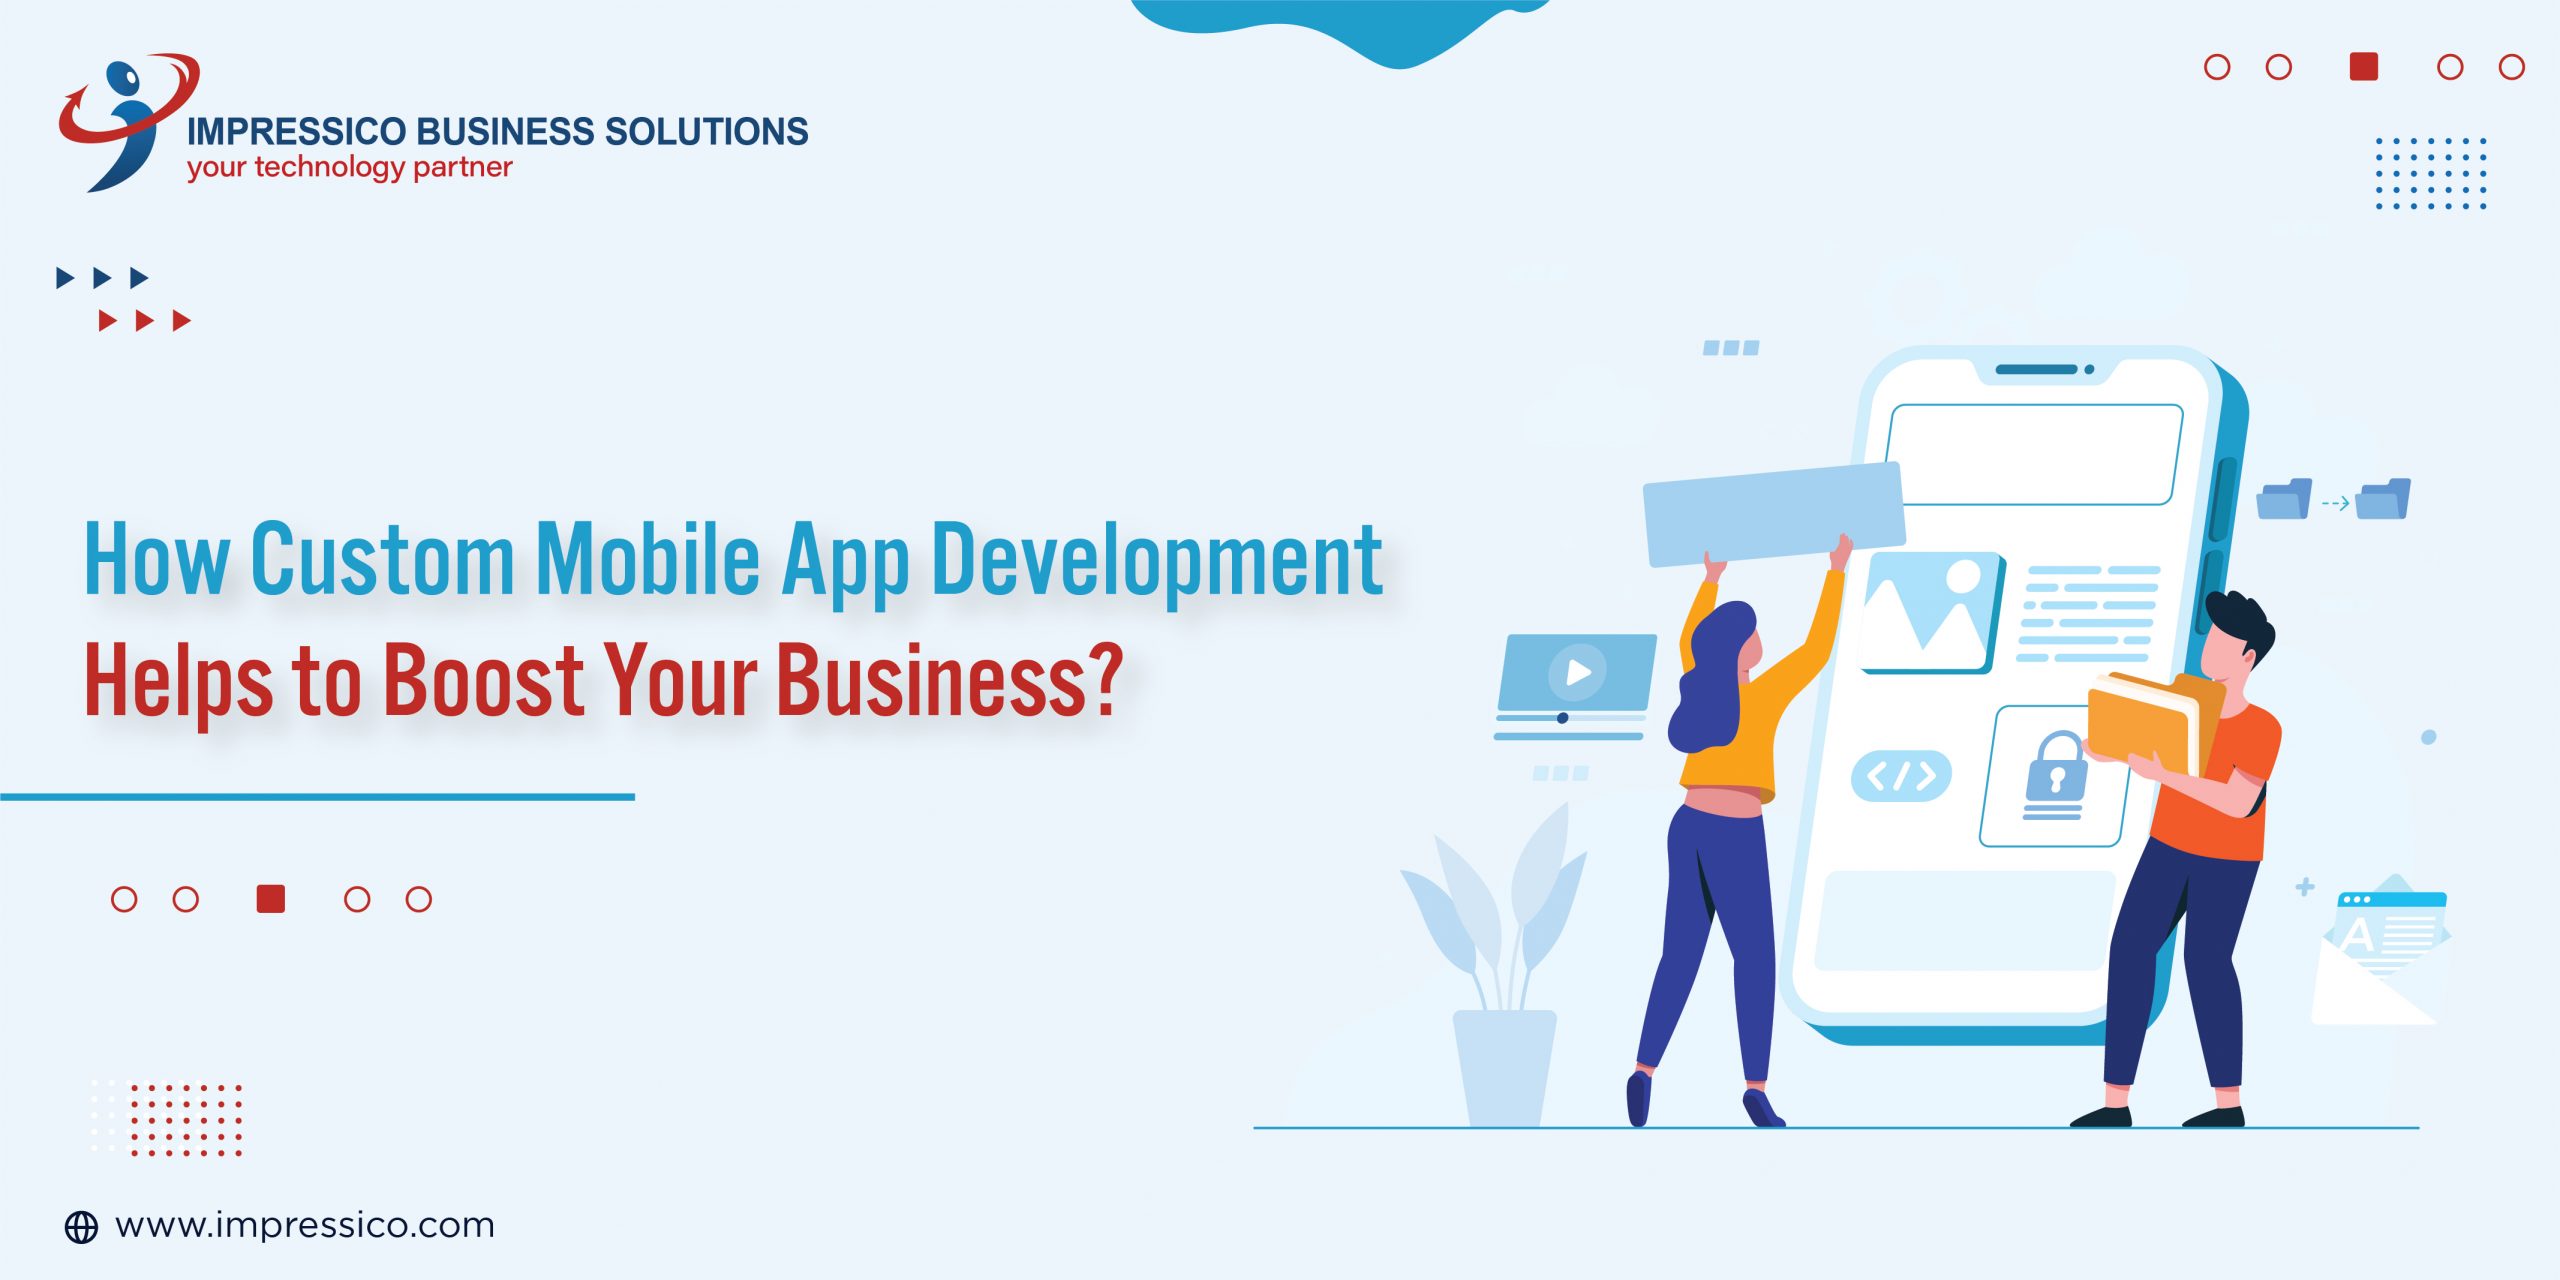 How Custom Mobile App Development Can Boost Your Business